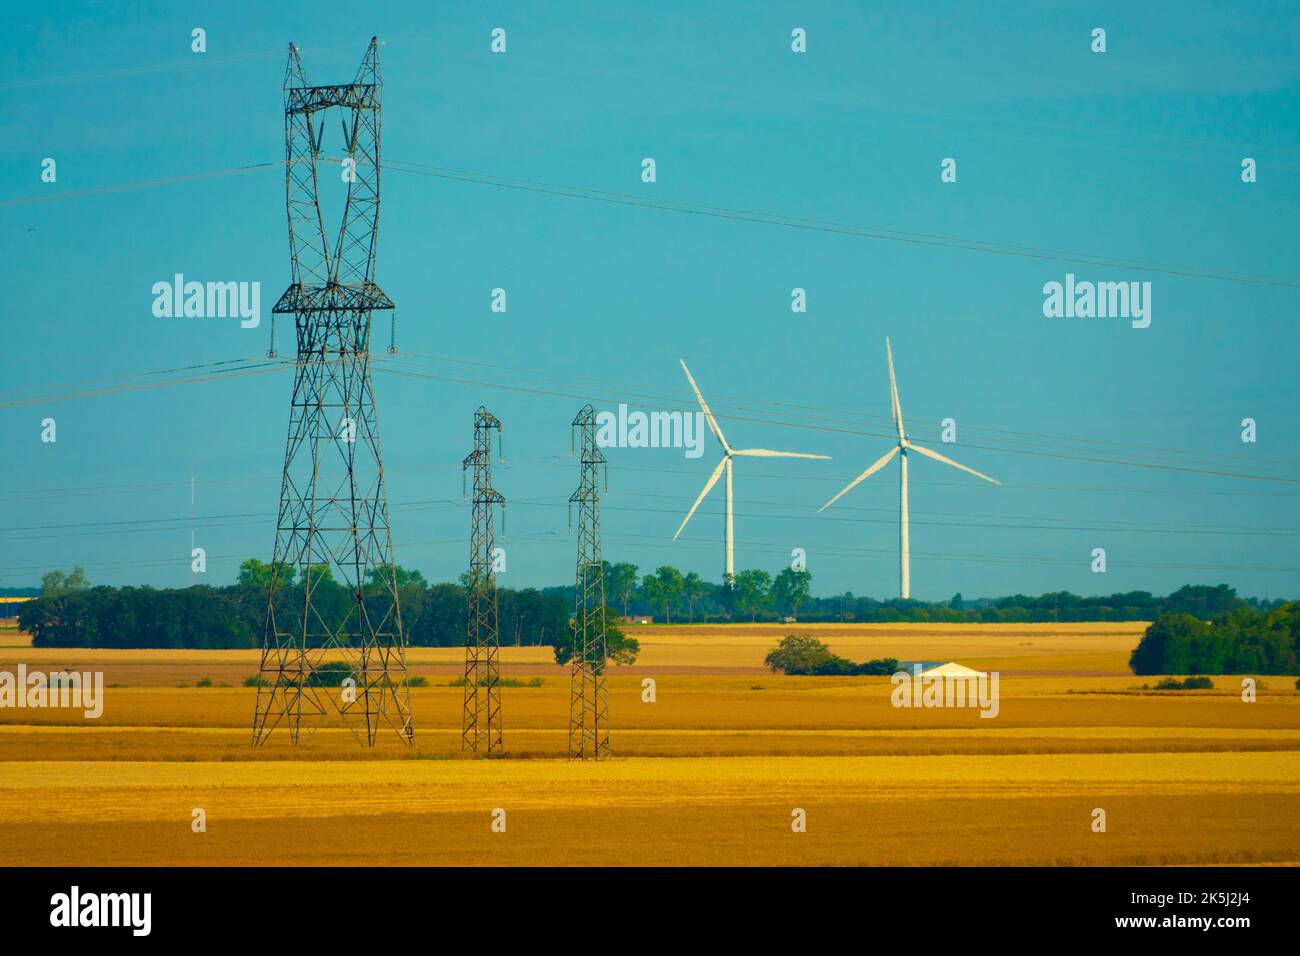 France, Essonne (91), Merobert, plain of Beauce, high voltage power lines of the RTE Electricity Transport Network and 2 wind turbines Stock Photo